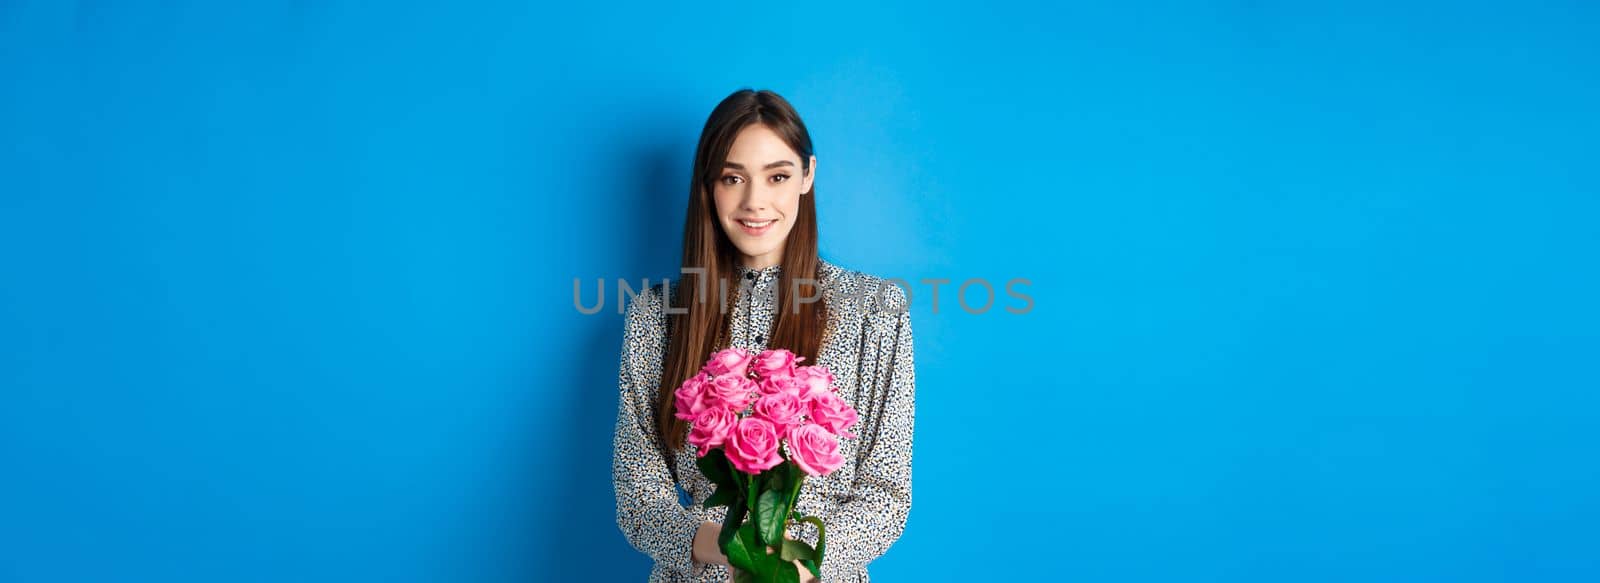 Valentines day concept. Tender young woman in dress, holding bouquet of roses on romantic date, standing on blue background.